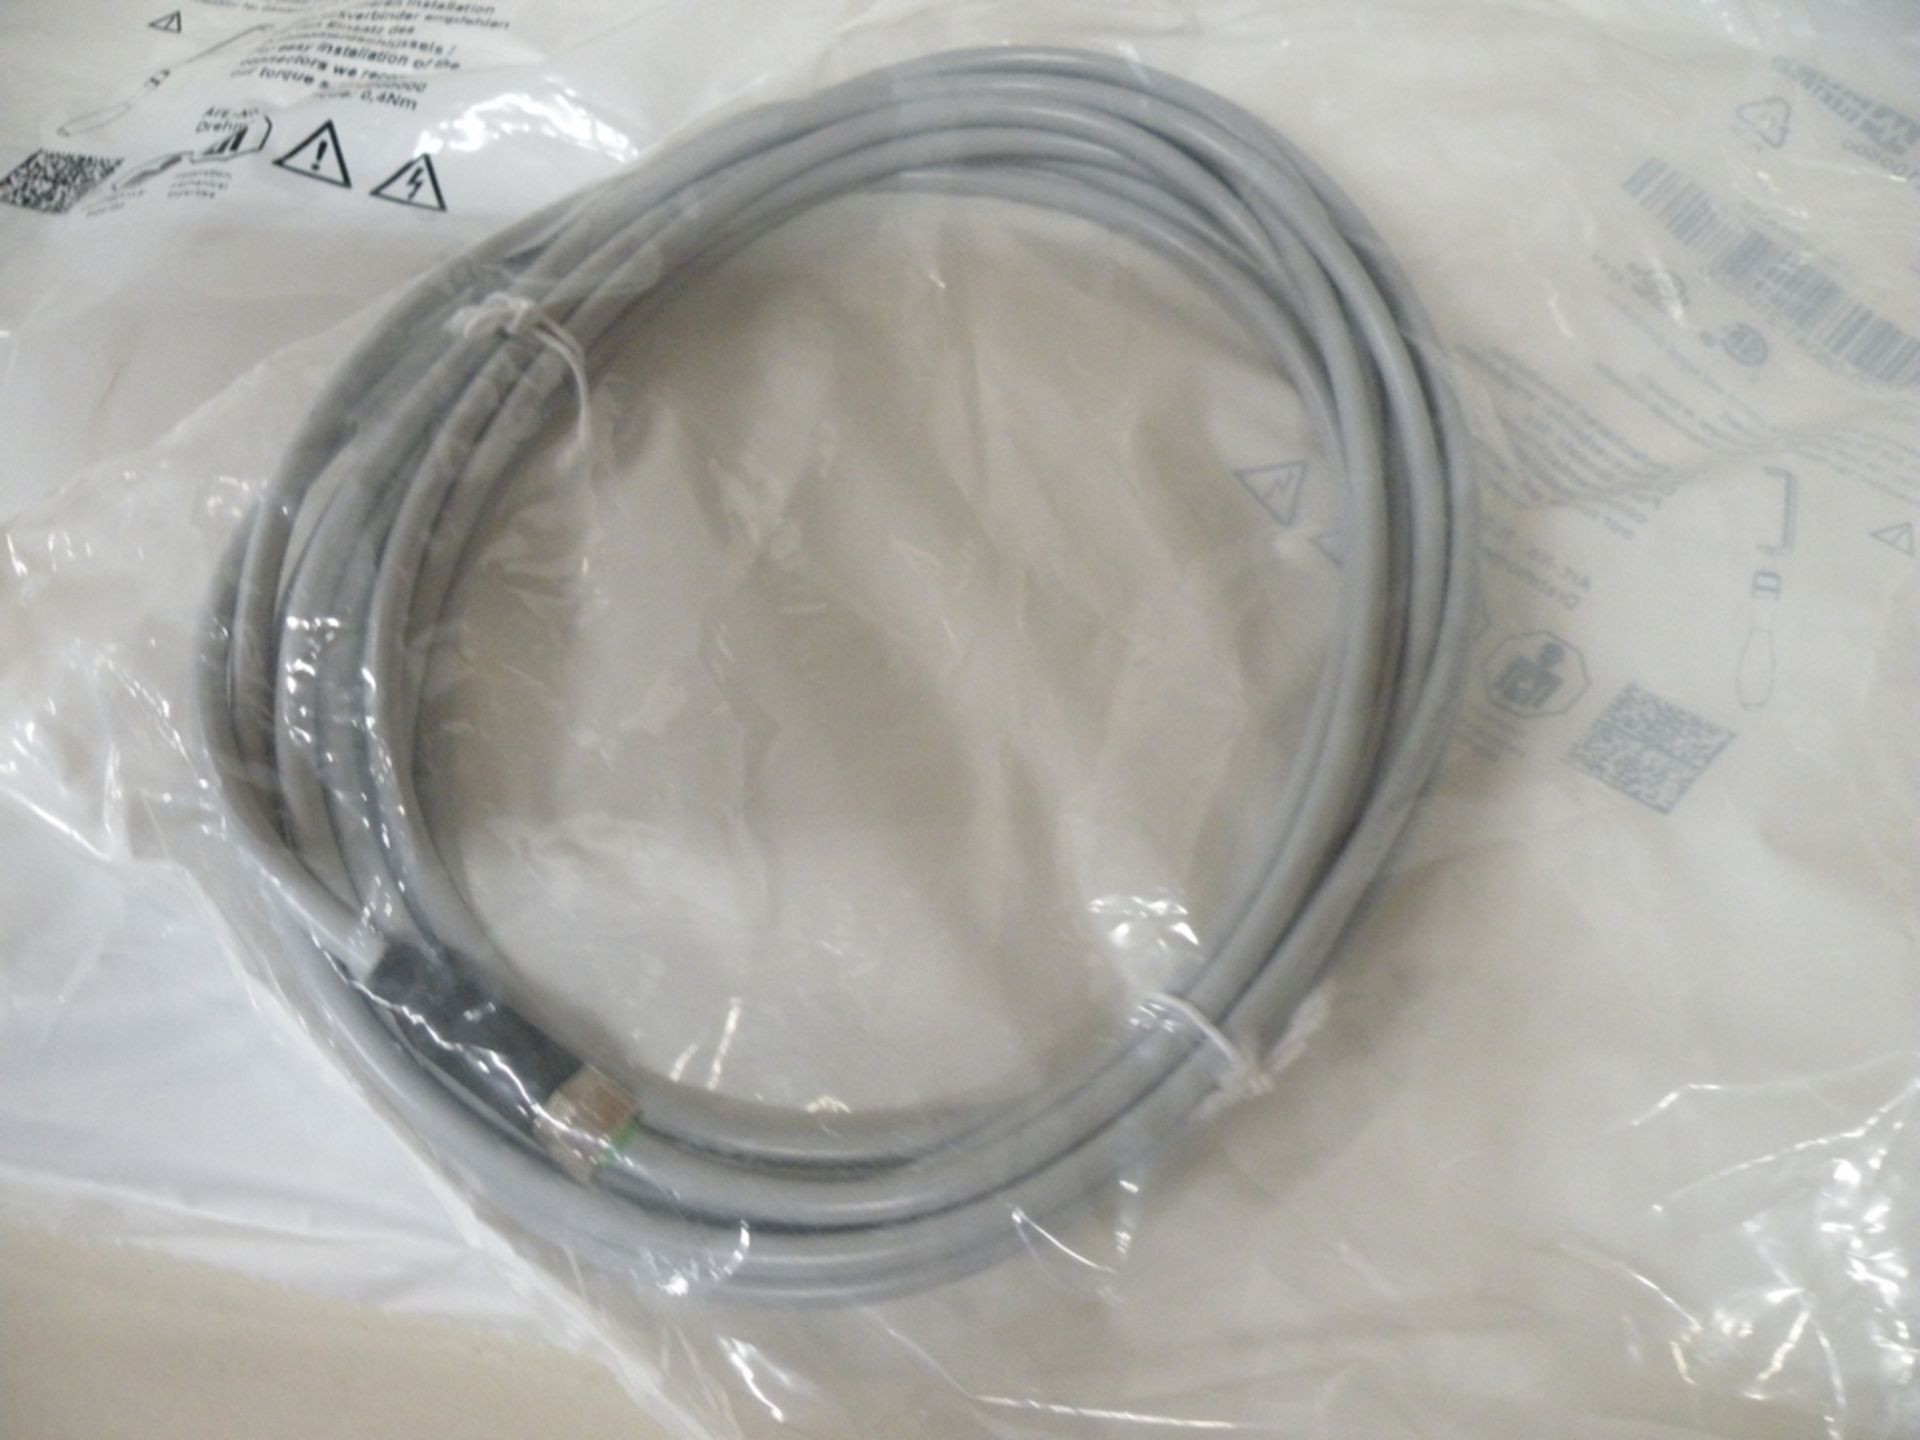 (10) MURR M8 Female Straight with Cable, #7000-08041-2100500, New In Box (S Fulton, TN) - Image 2 of 3